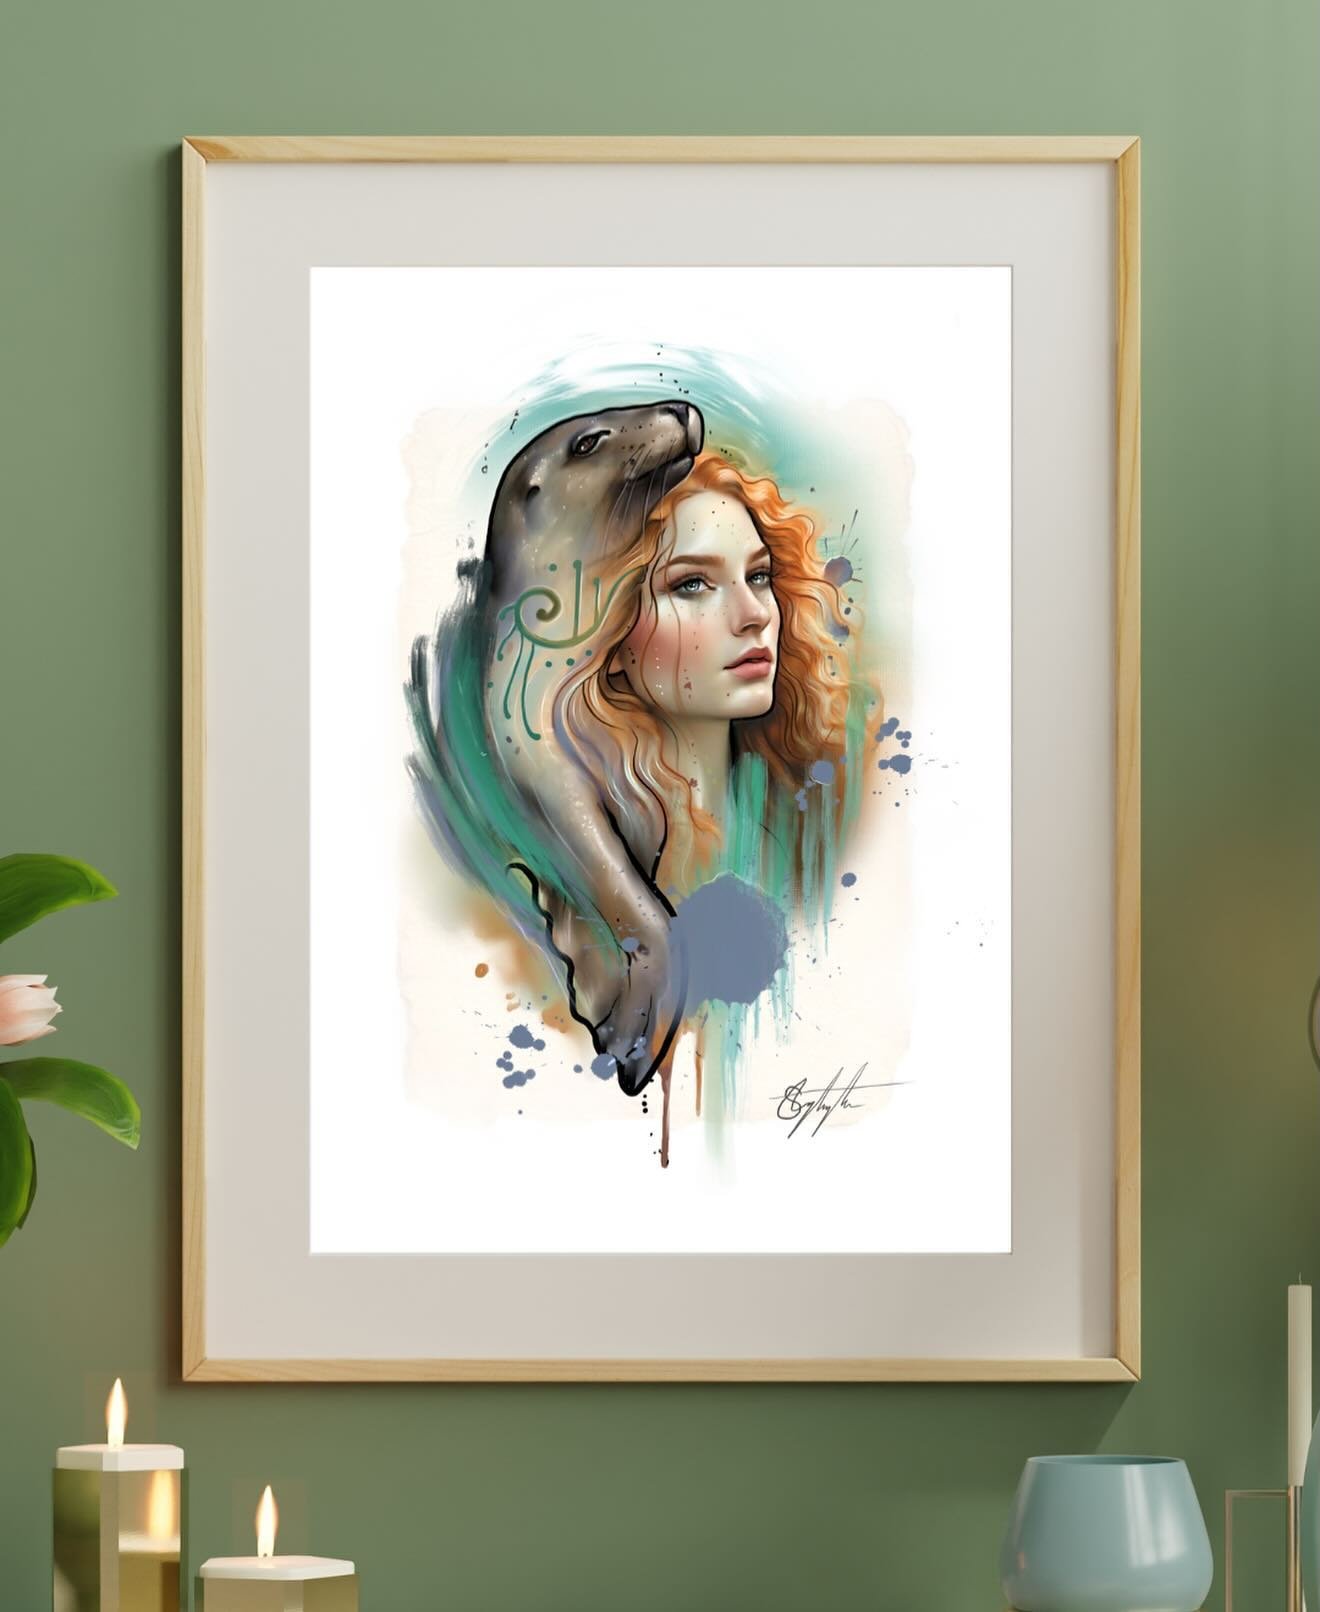 NOW AVAILABLE in store at @soltempletattoo and online via my WEBSITE www.staceynightingale.com 🙏🏽🫶🏽

&ldquo;SELKIE&rdquo; &mdash;&mdash; Quality fine art A3 prints (print only - framed in pic for reference) $60 aud 

This piece was channelled thr